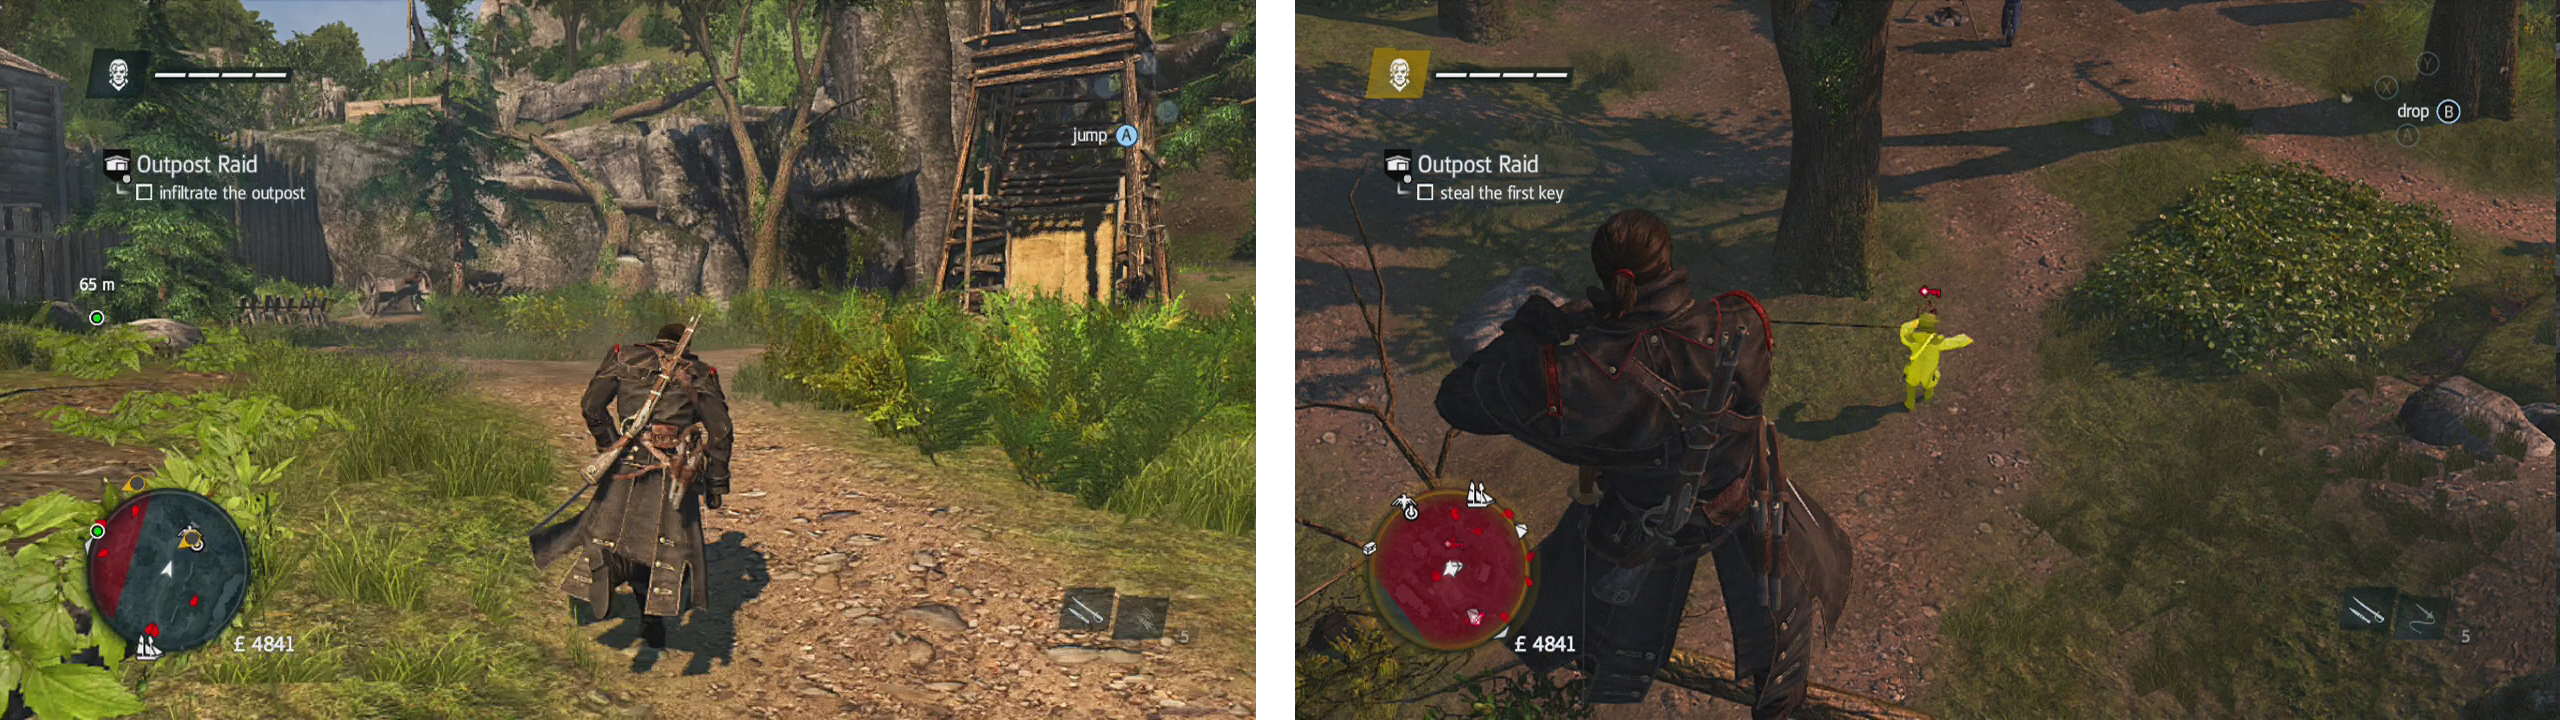 Use the fallen tree by the guard tower (left) to infiltrate the outpost. Use a rope dart from a branch to kill the key carrier (right).